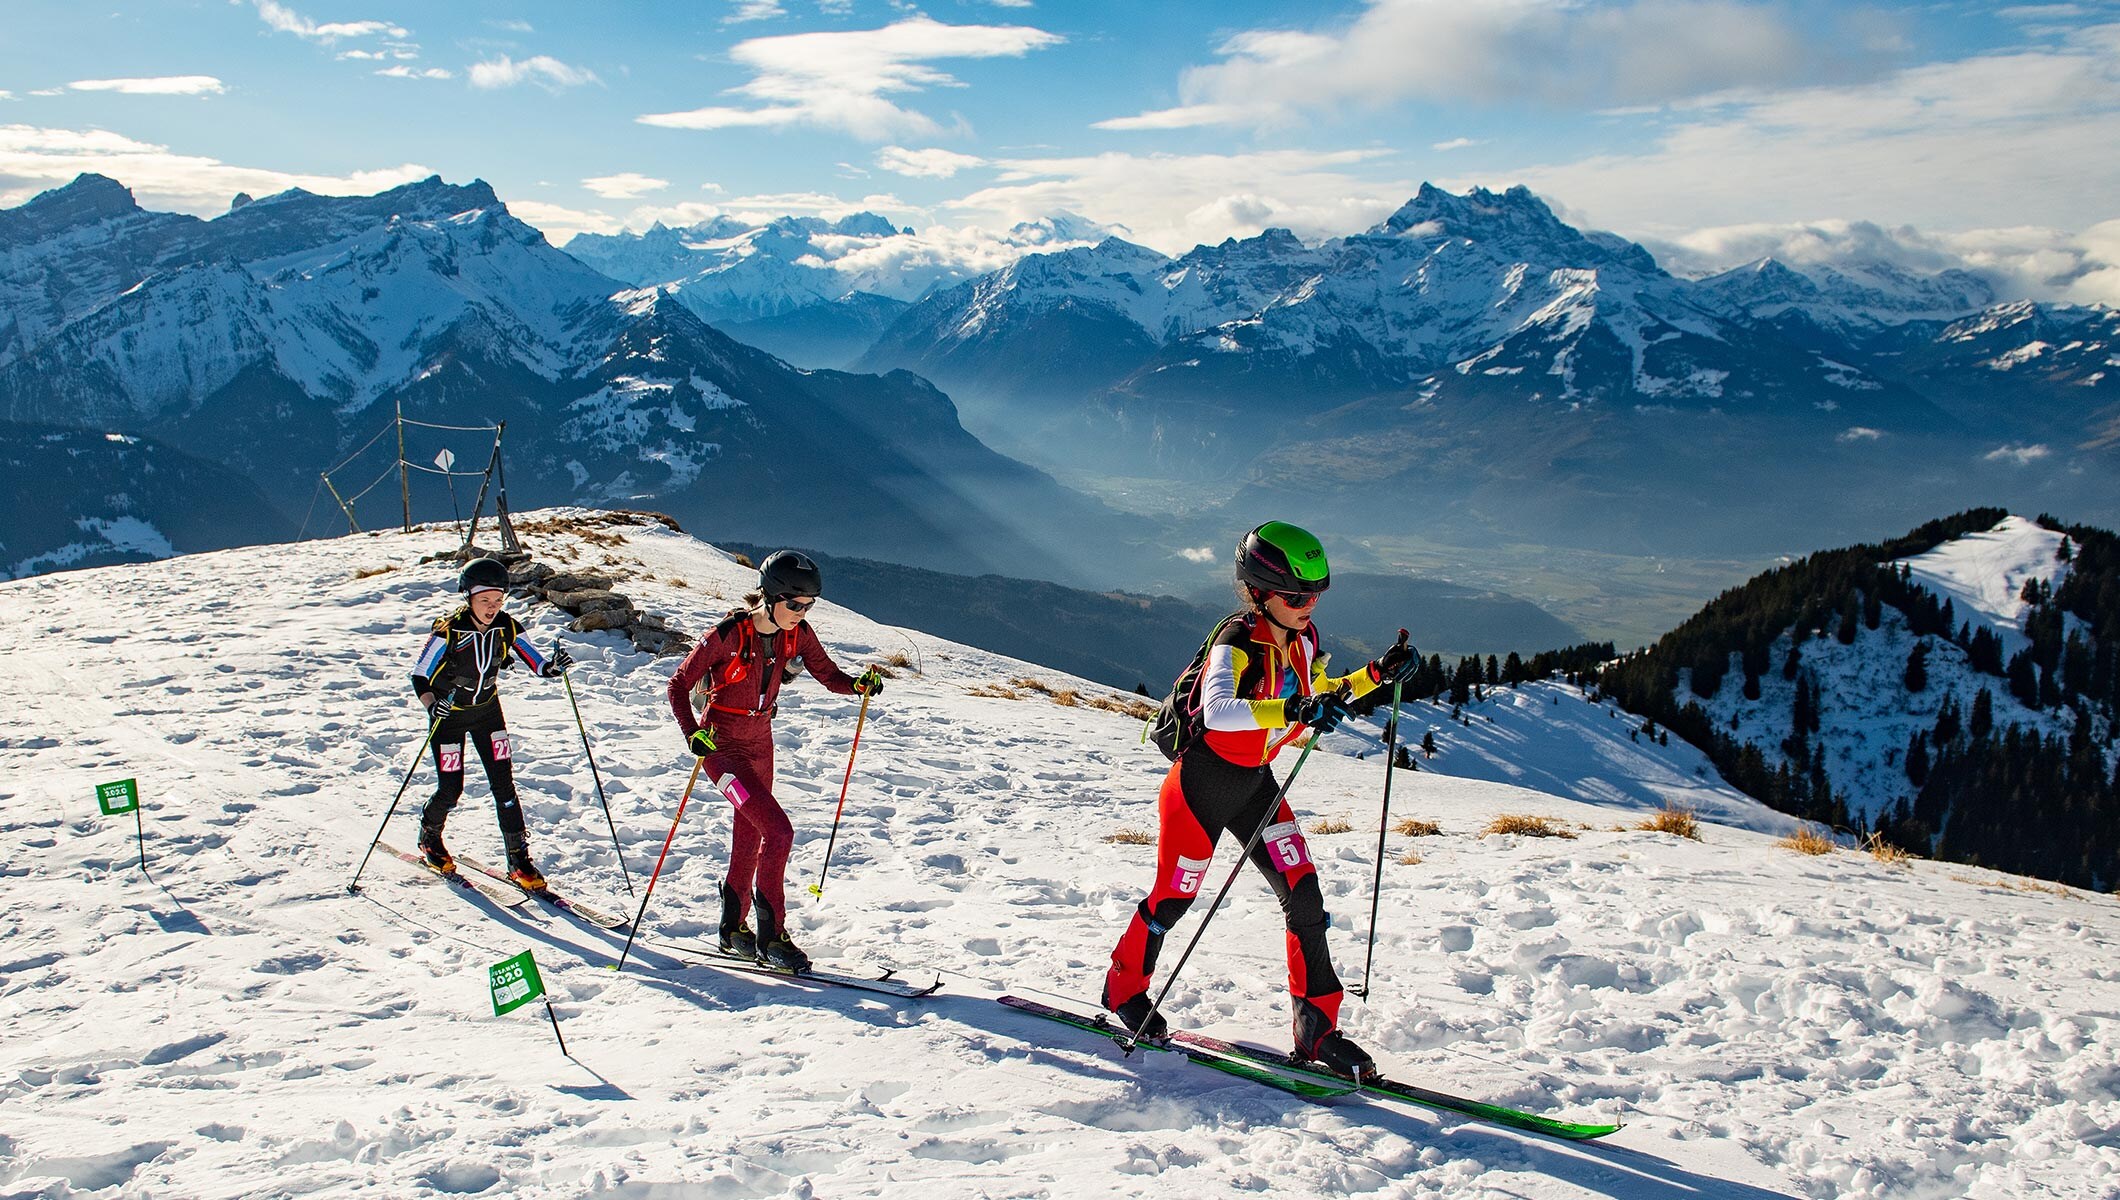 Women's Individual in Ski Mountaineering during Lausanne 2020 Winter Youth Olympics Games